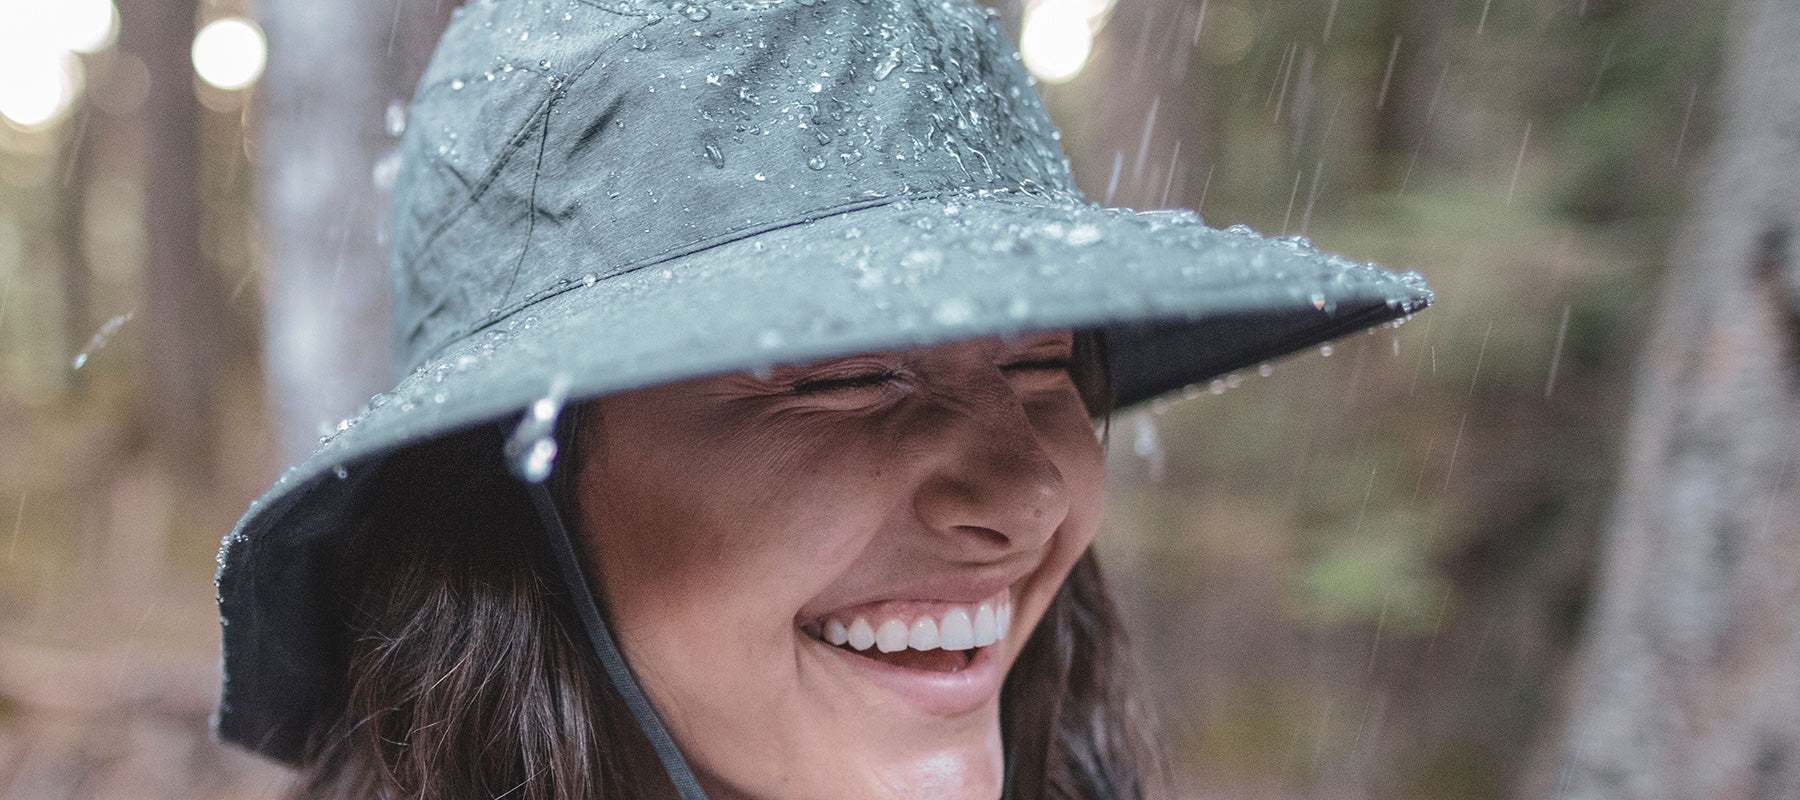 Woman with rain beading off hat